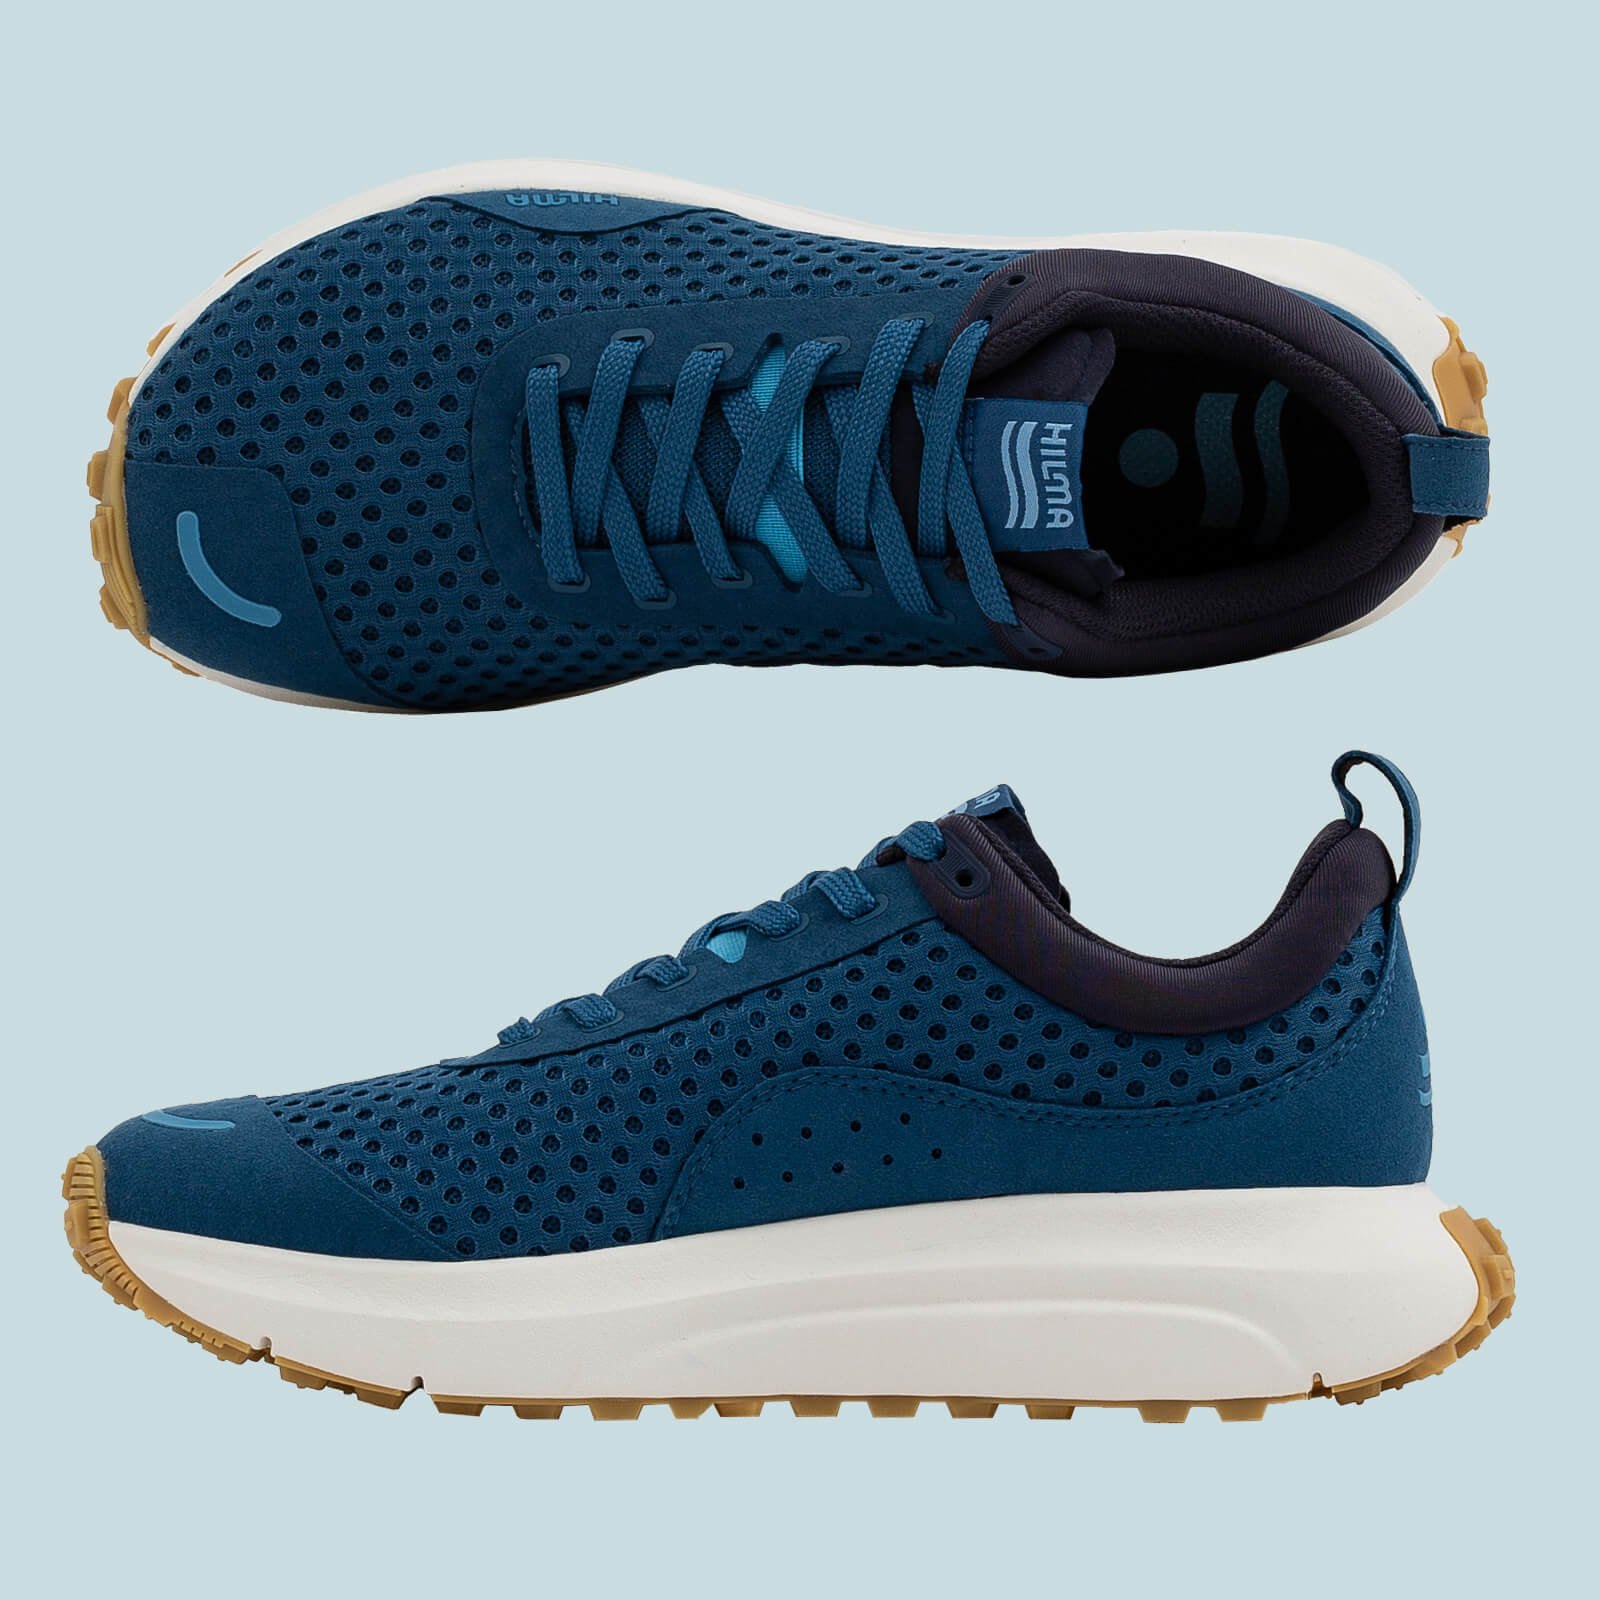 Top and Side Angle view of the Hilma Running Shoe in Blue